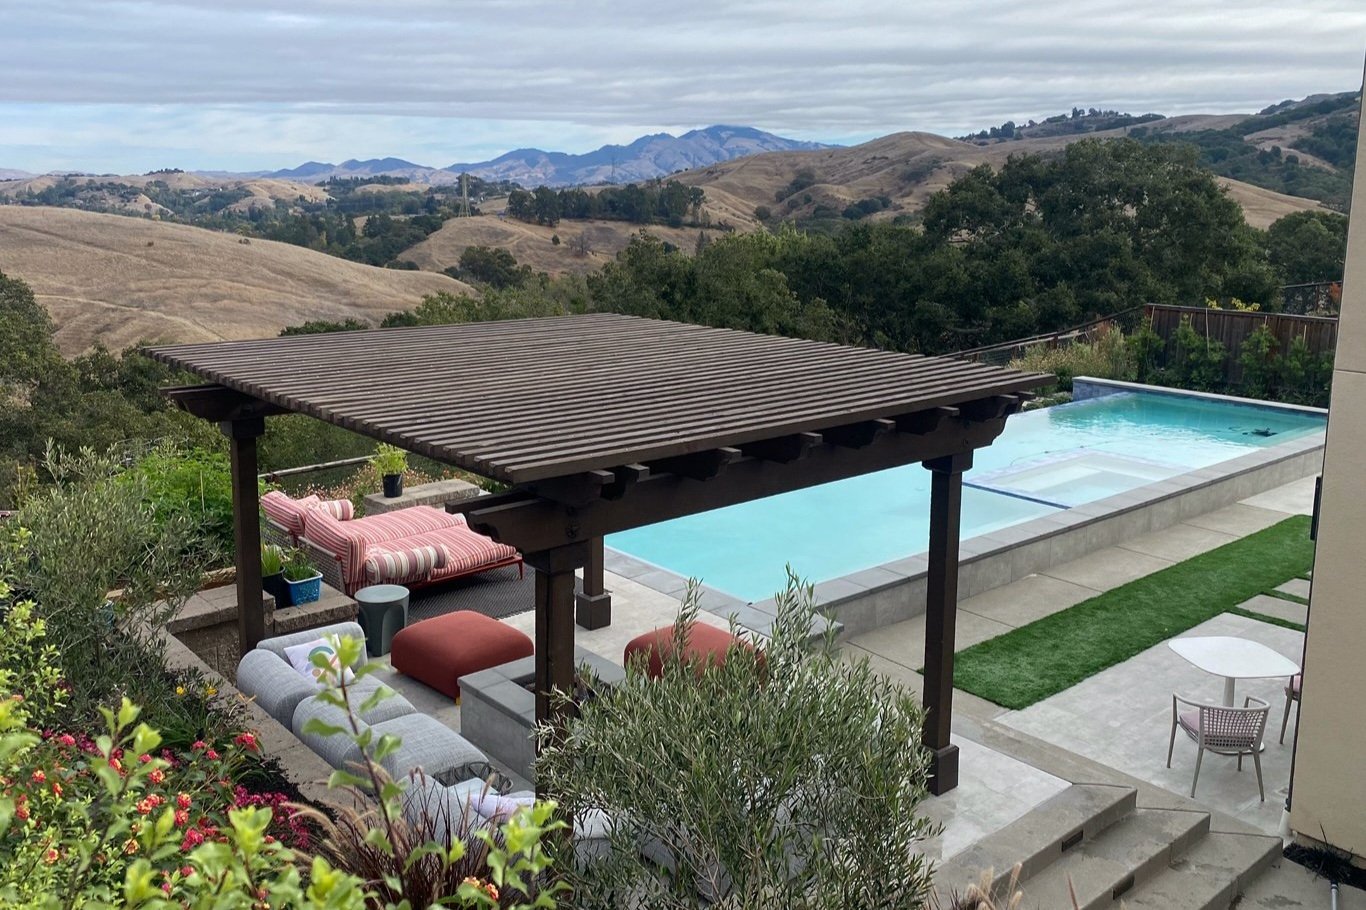 Alderland – SF Bay Area Pool & Landscape Co Creates Luxurious Outdoor Spaces with Expert Pool and Landscape Design in Walnut Creek, CA